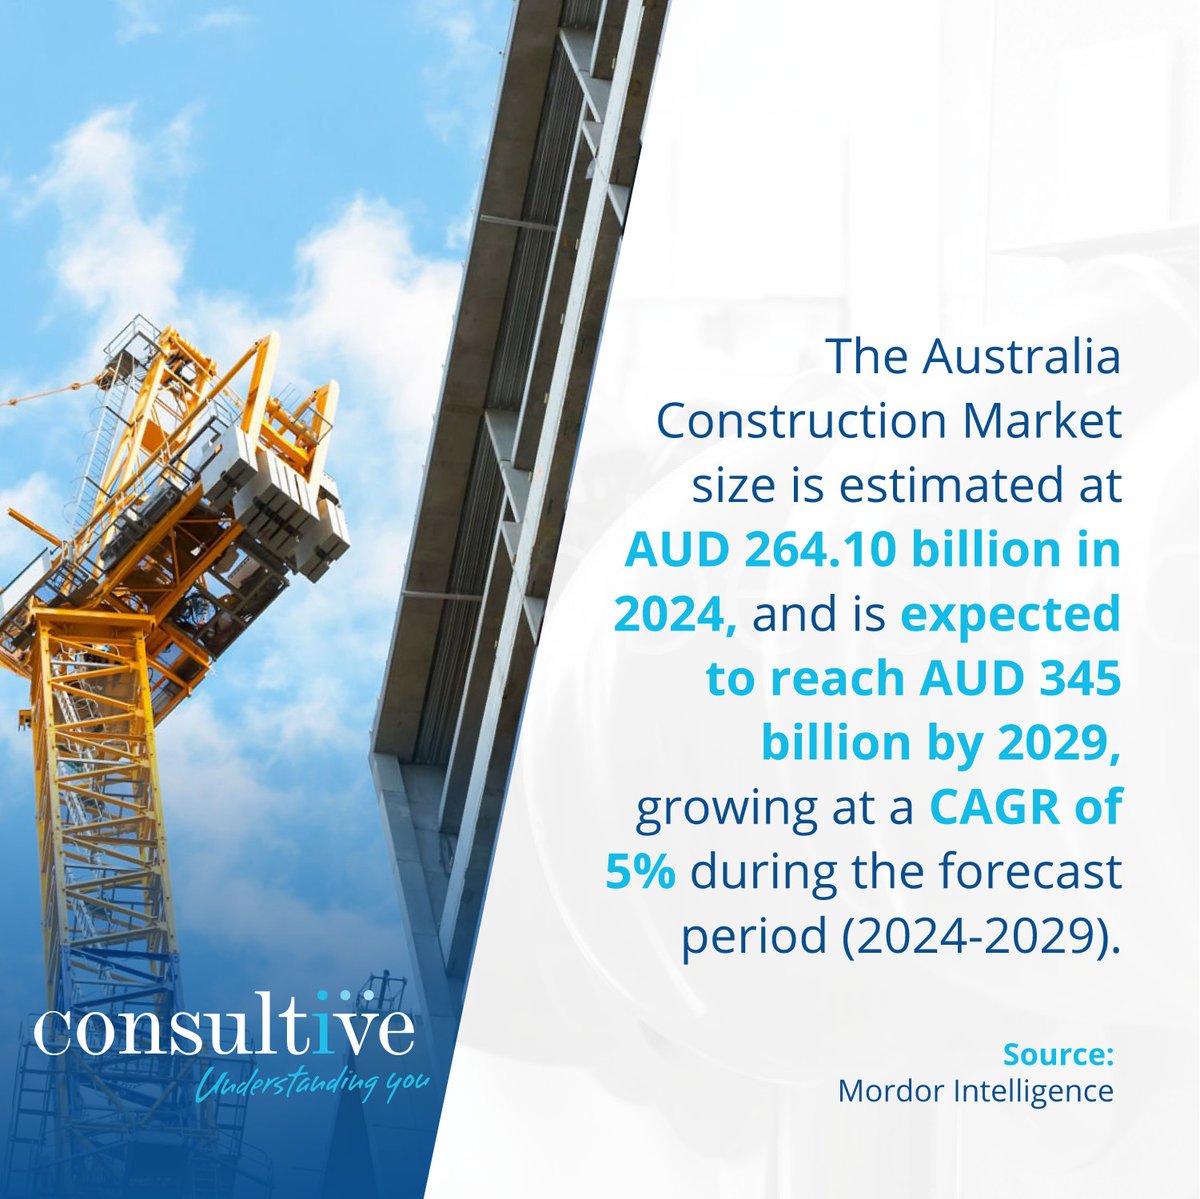 Exciting growth ahead in the construction market means big opportunities for professionals! 

Thinking about a career in construction? Check out available job openings in the industry! ➡️ bit.ly/4bq7owK

#AustraliaJobs #JobOpportunity #BuiltEnvironment